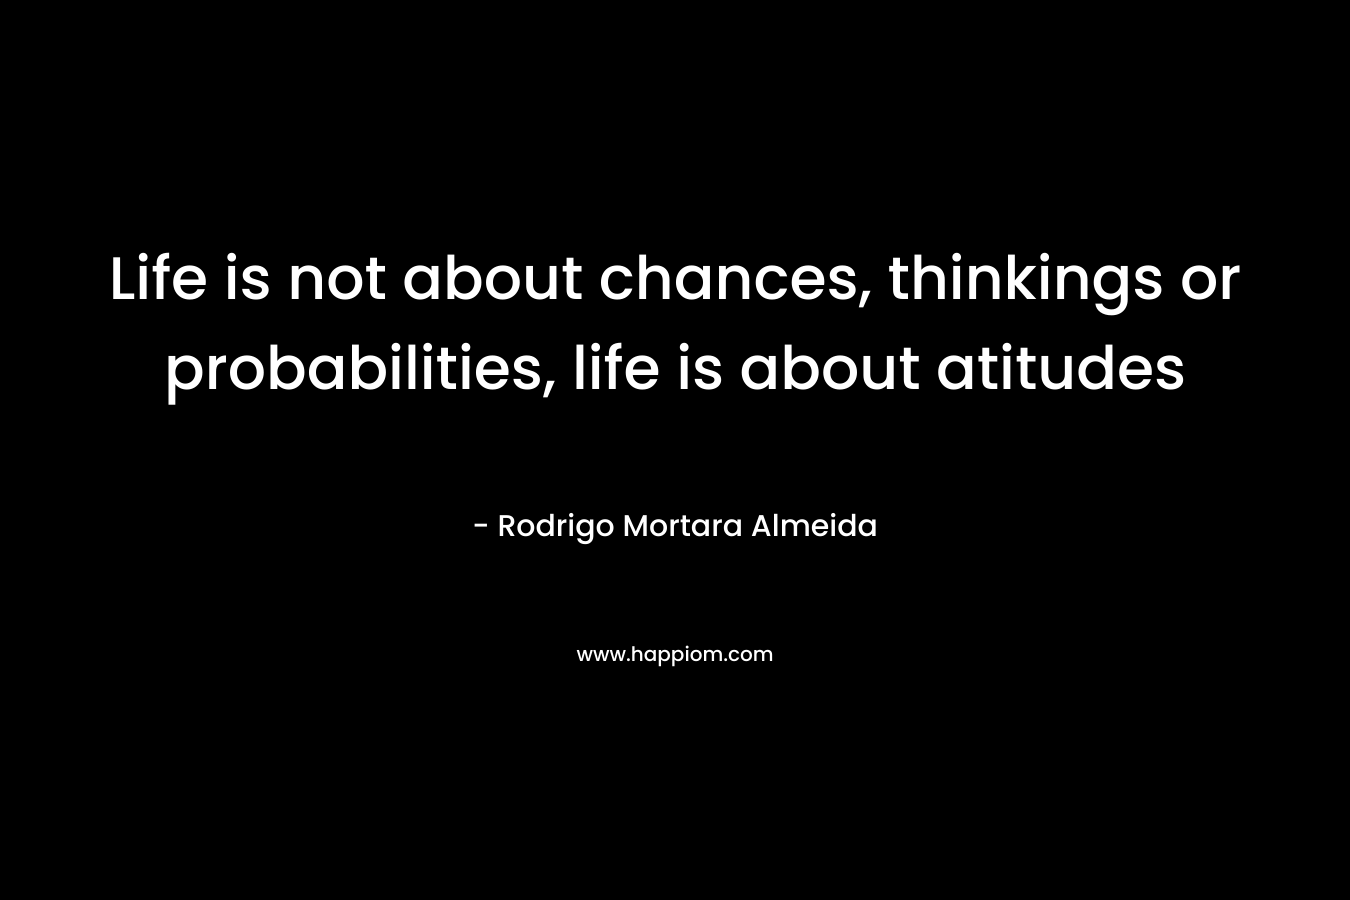 Life is not about chances, thinkings or probabilities, life is about atitudes – Rodrigo Mortara Almeida